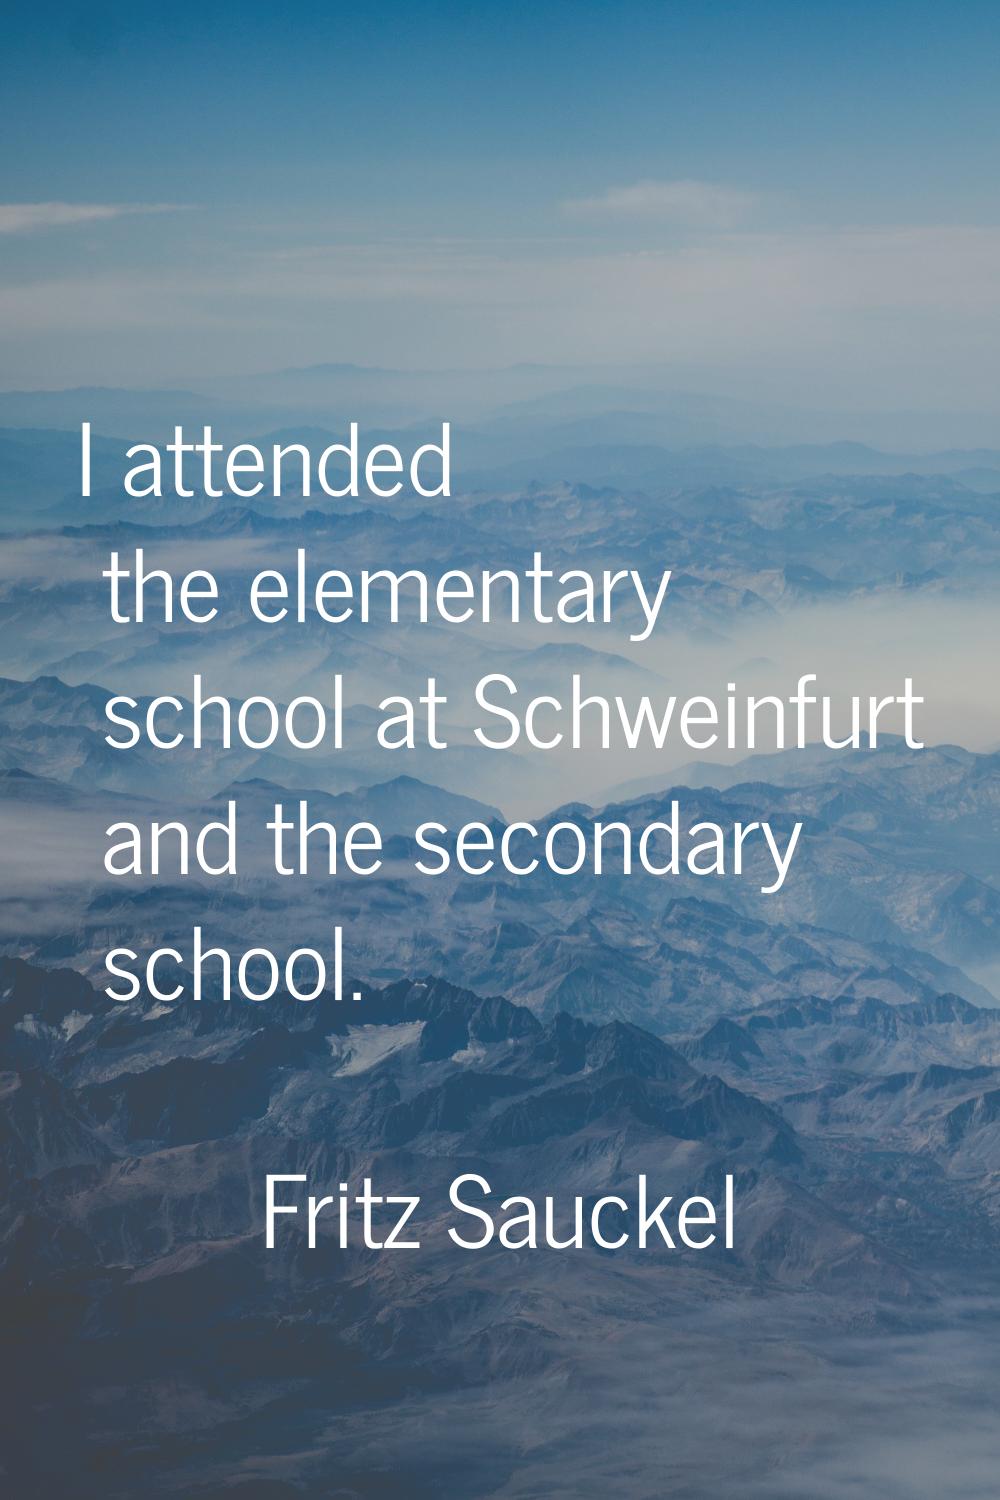 I attended the elementary school at Schweinfurt and the secondary school.